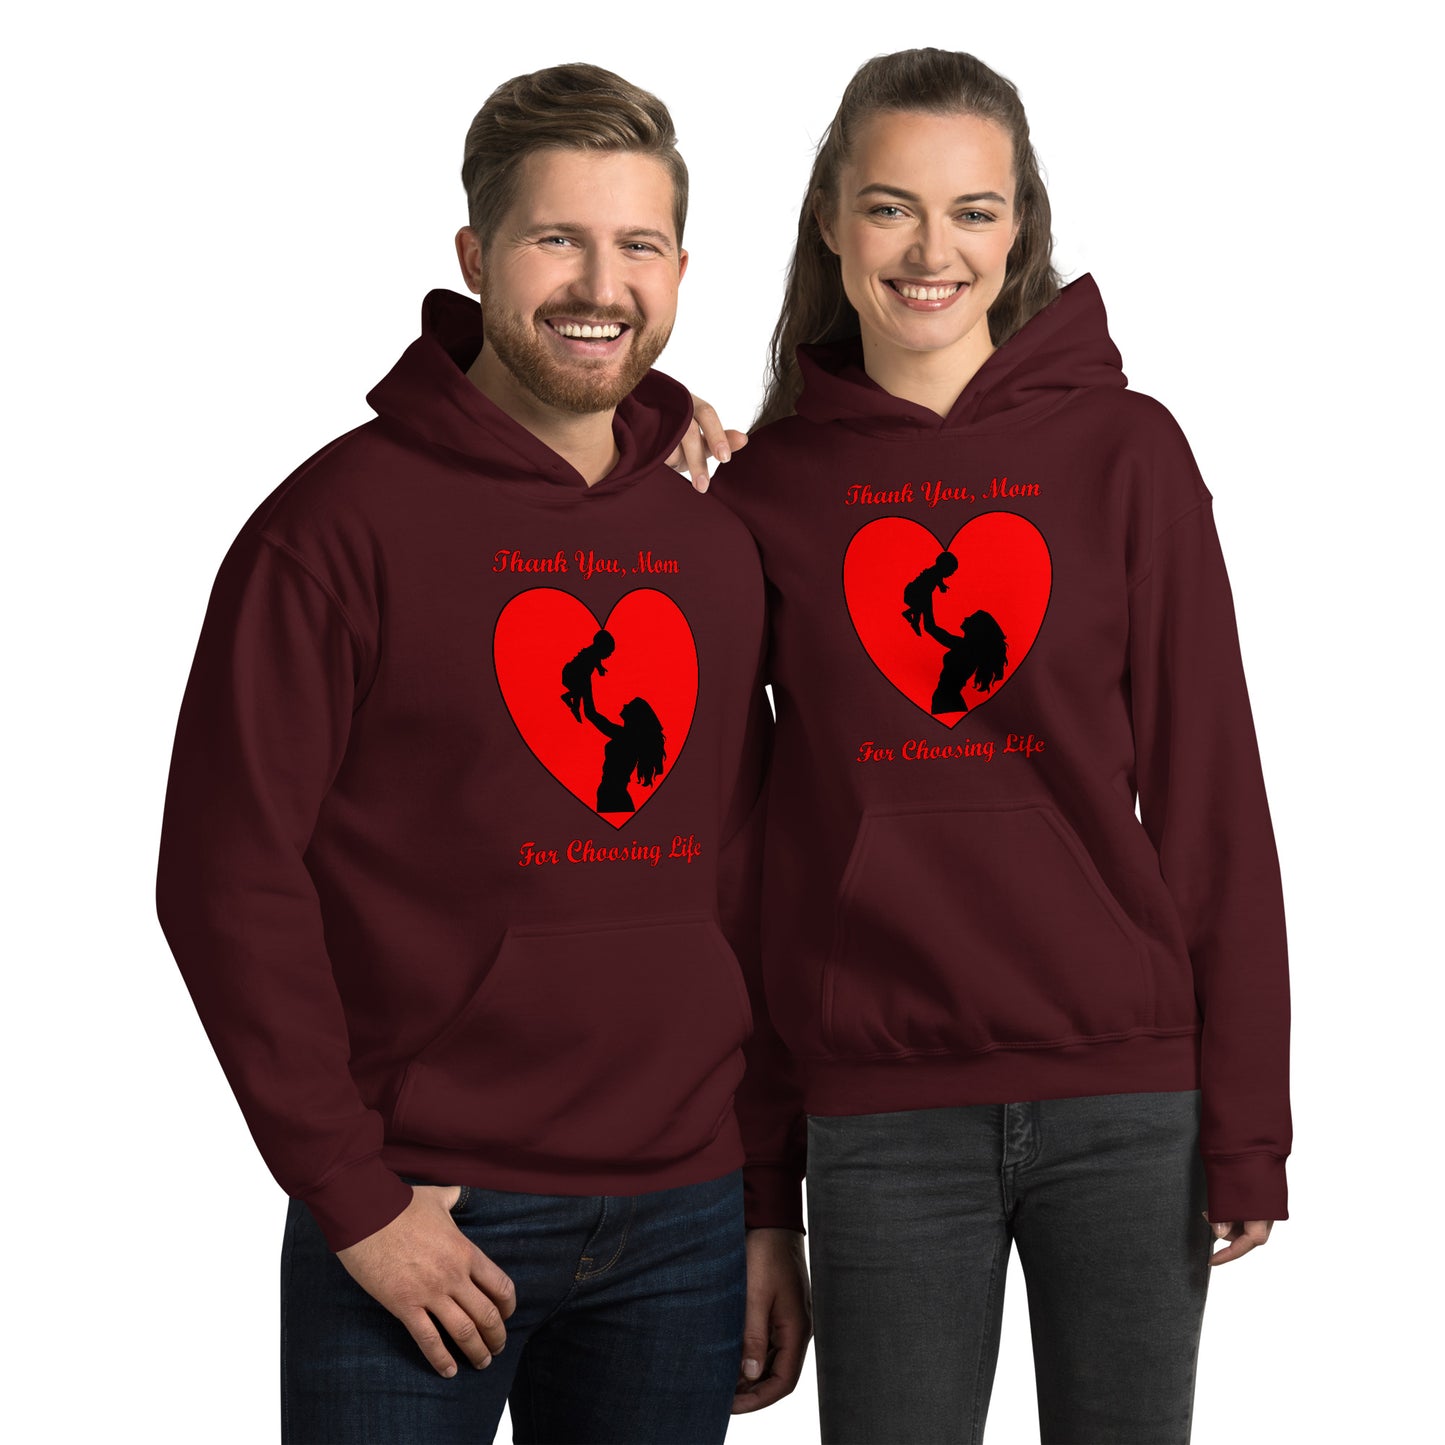 A002 Hoodie – Gildan 18500 Unisex Hoodie Featuring Mother and Baby Graphic with text “Thank You, Mom For Choosing Life.”